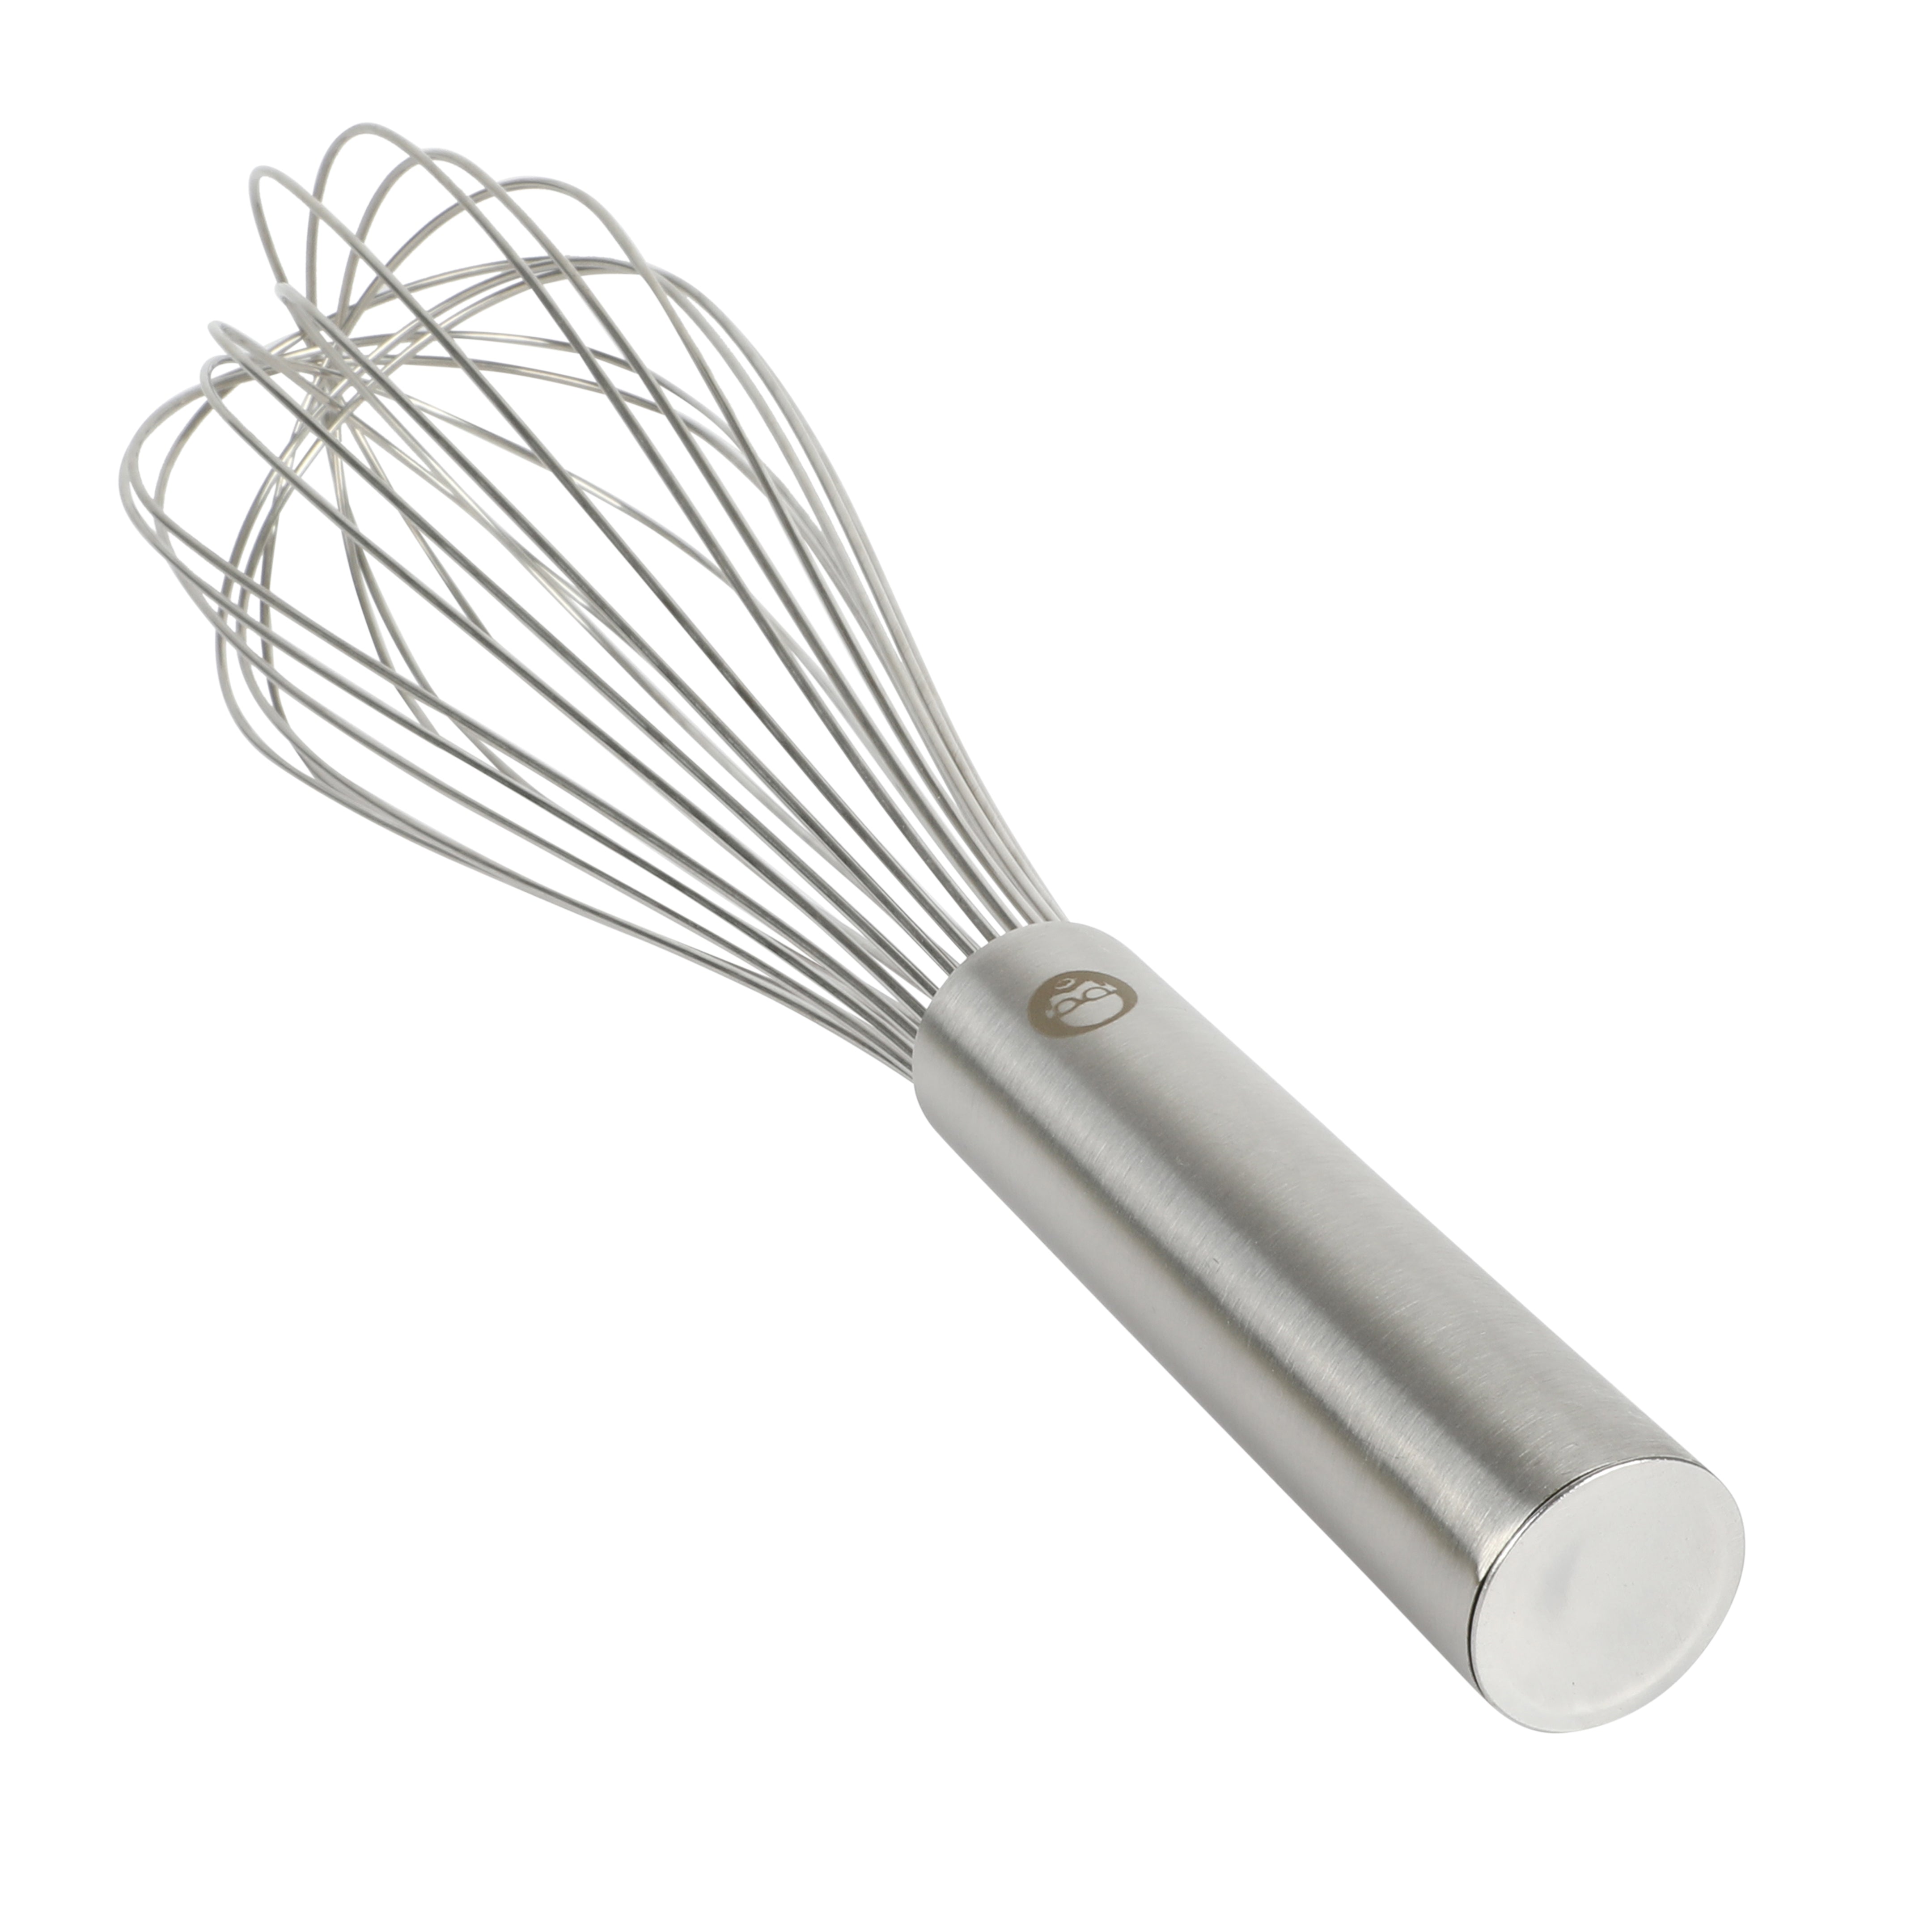 frying pan, 12 carbon steel - Whisk